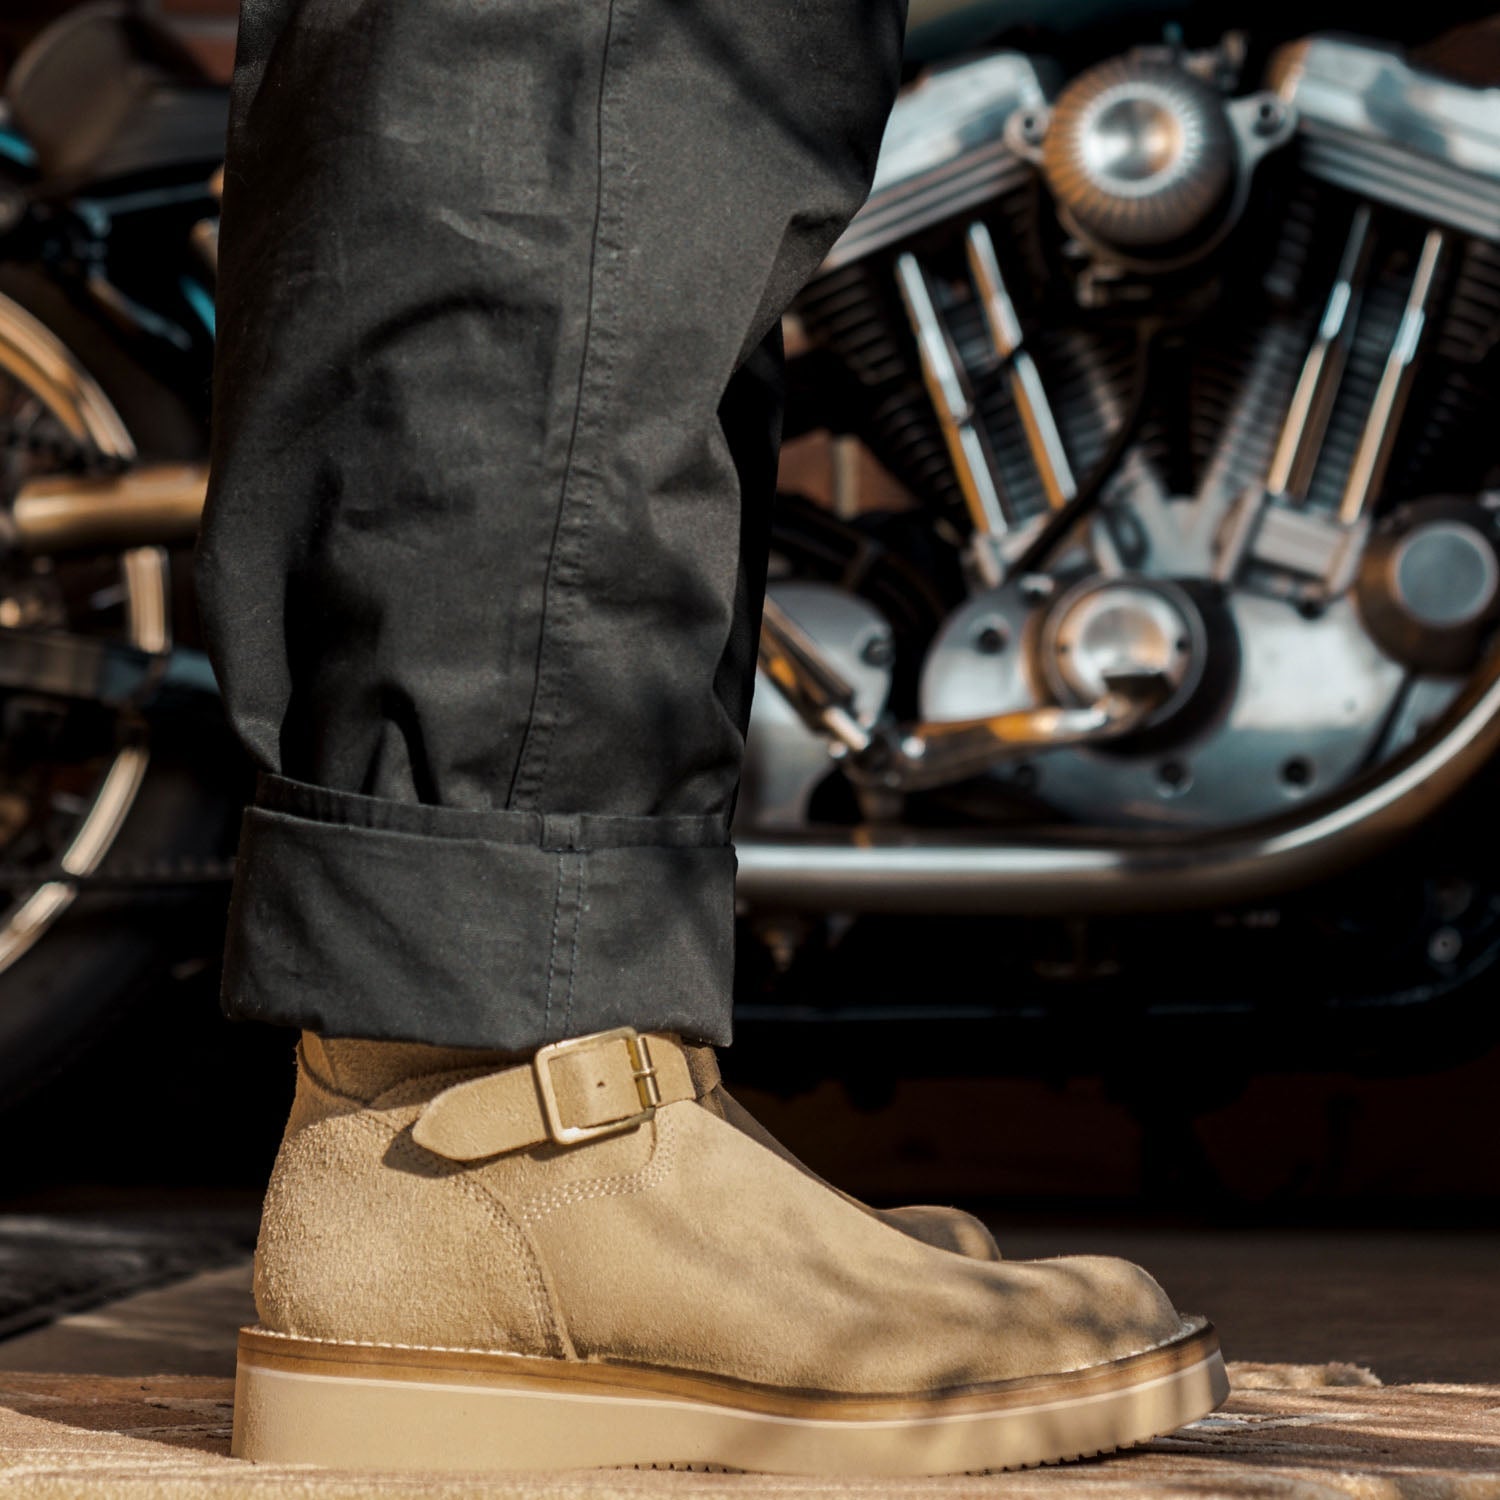 ROUGH RIDER ENGINEER BOOTS - May club